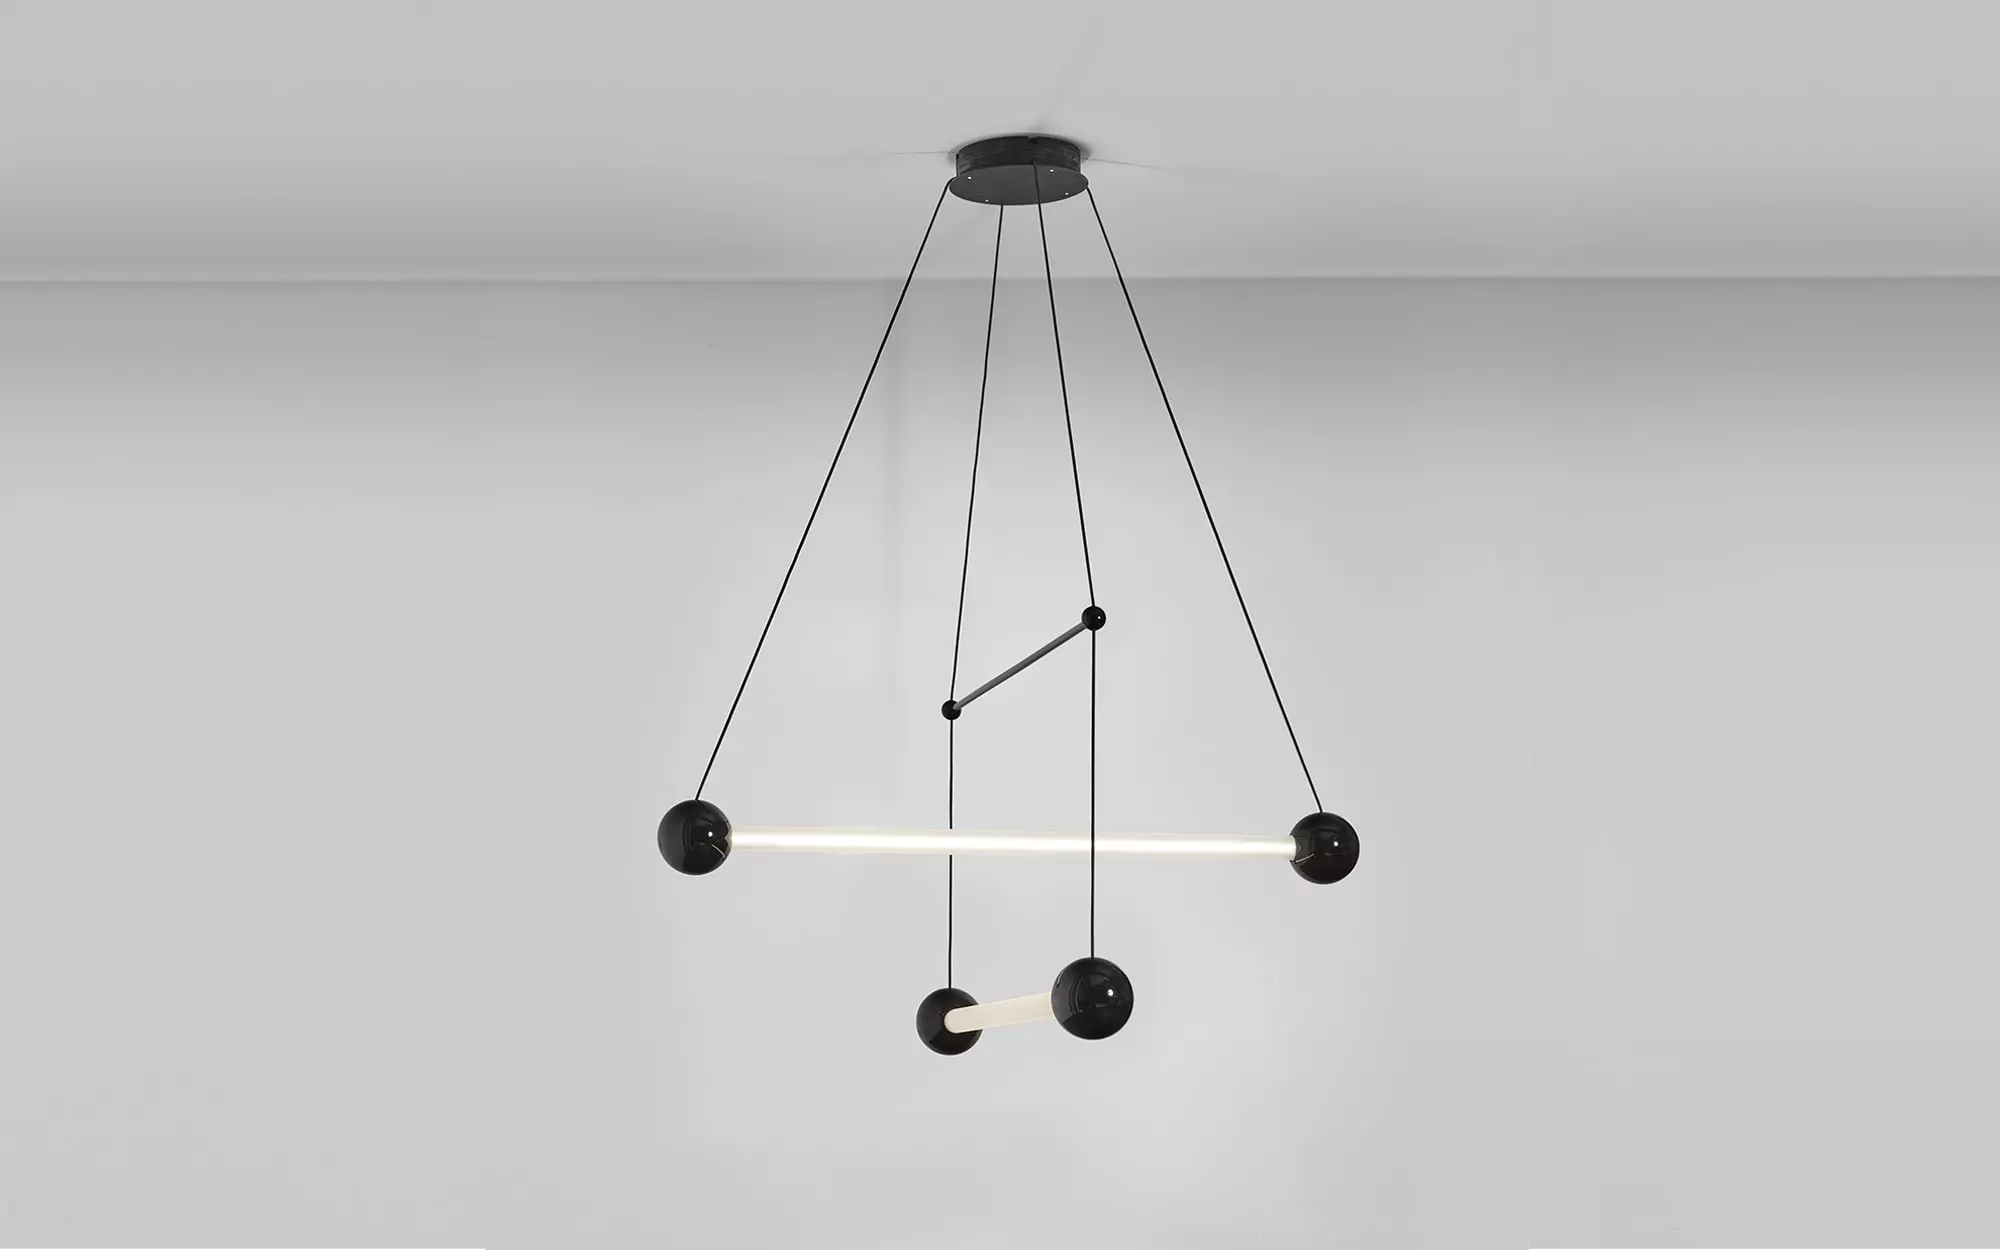 Trapeze 2 Ceiling light - Pierre Charpin - Art and Drawing - Galerie kreo